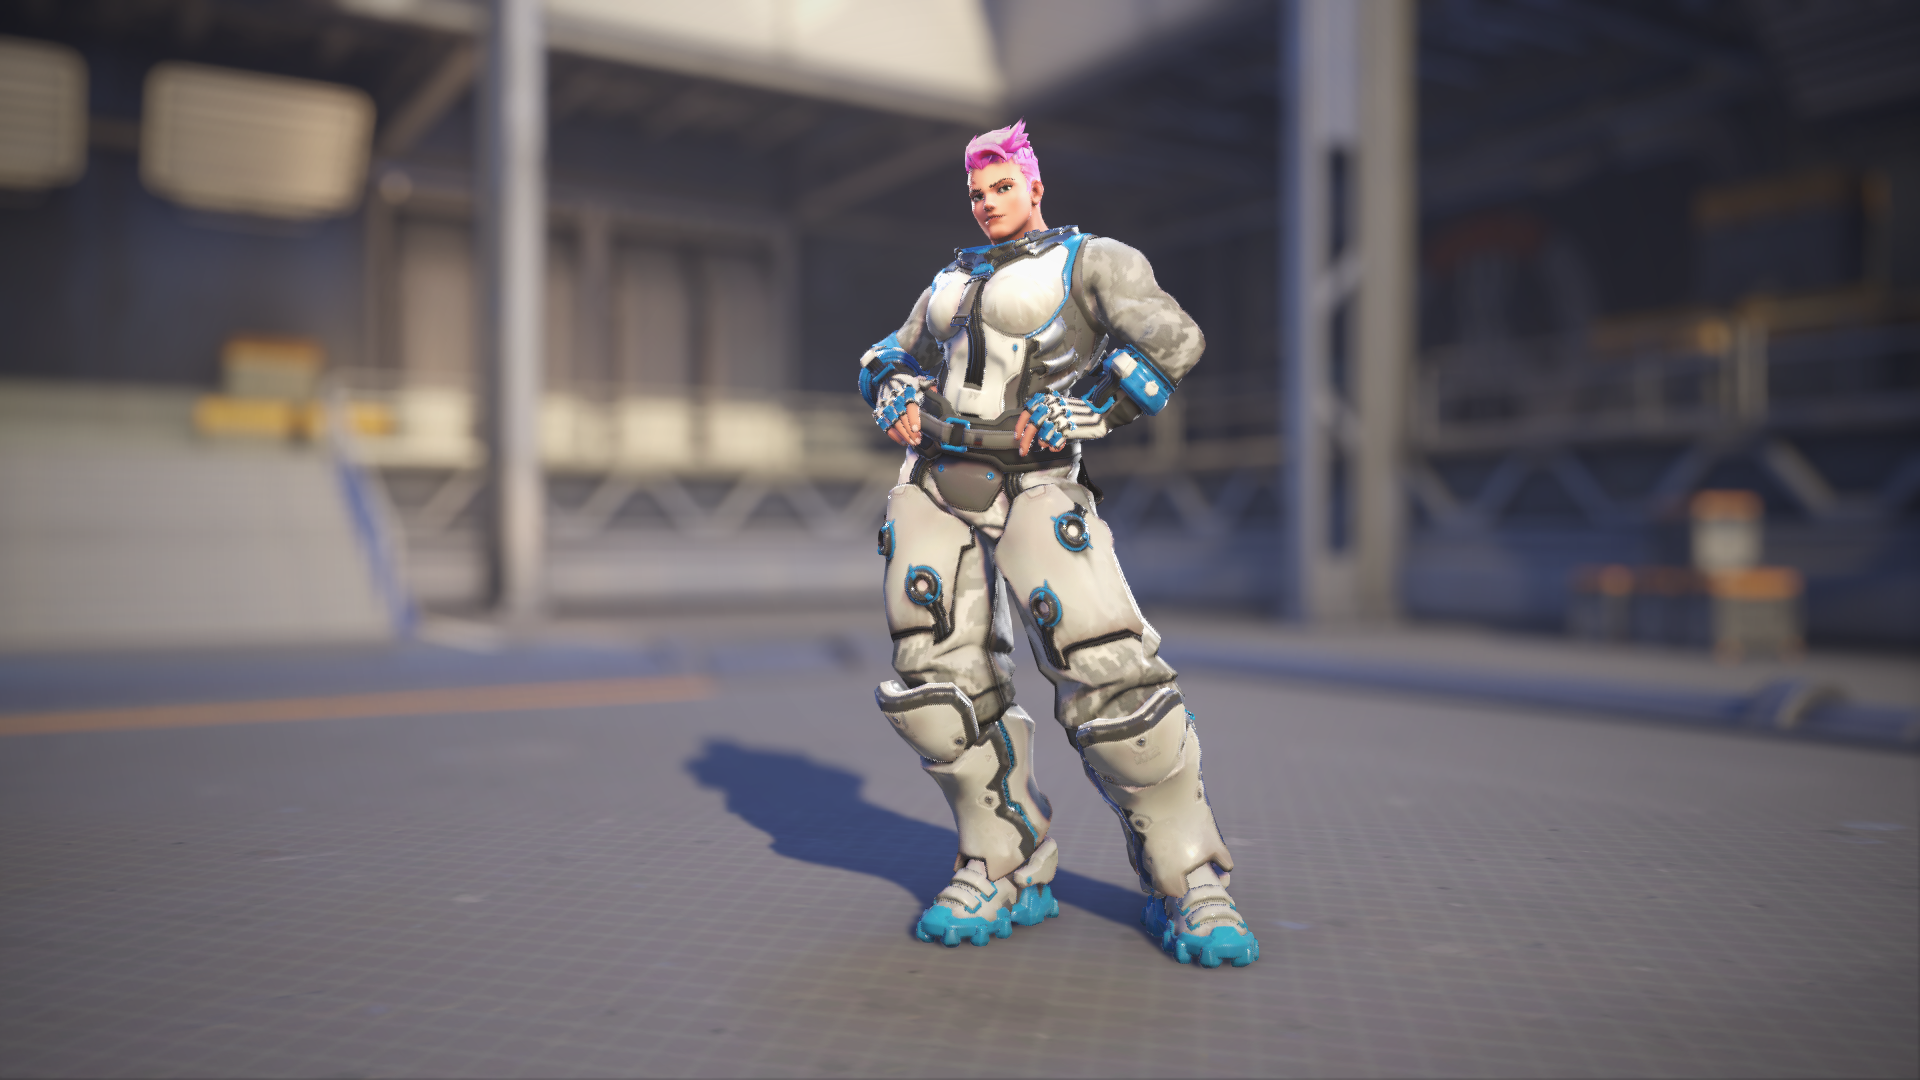 Zarya models her Frosted skin in Overwatch 2.